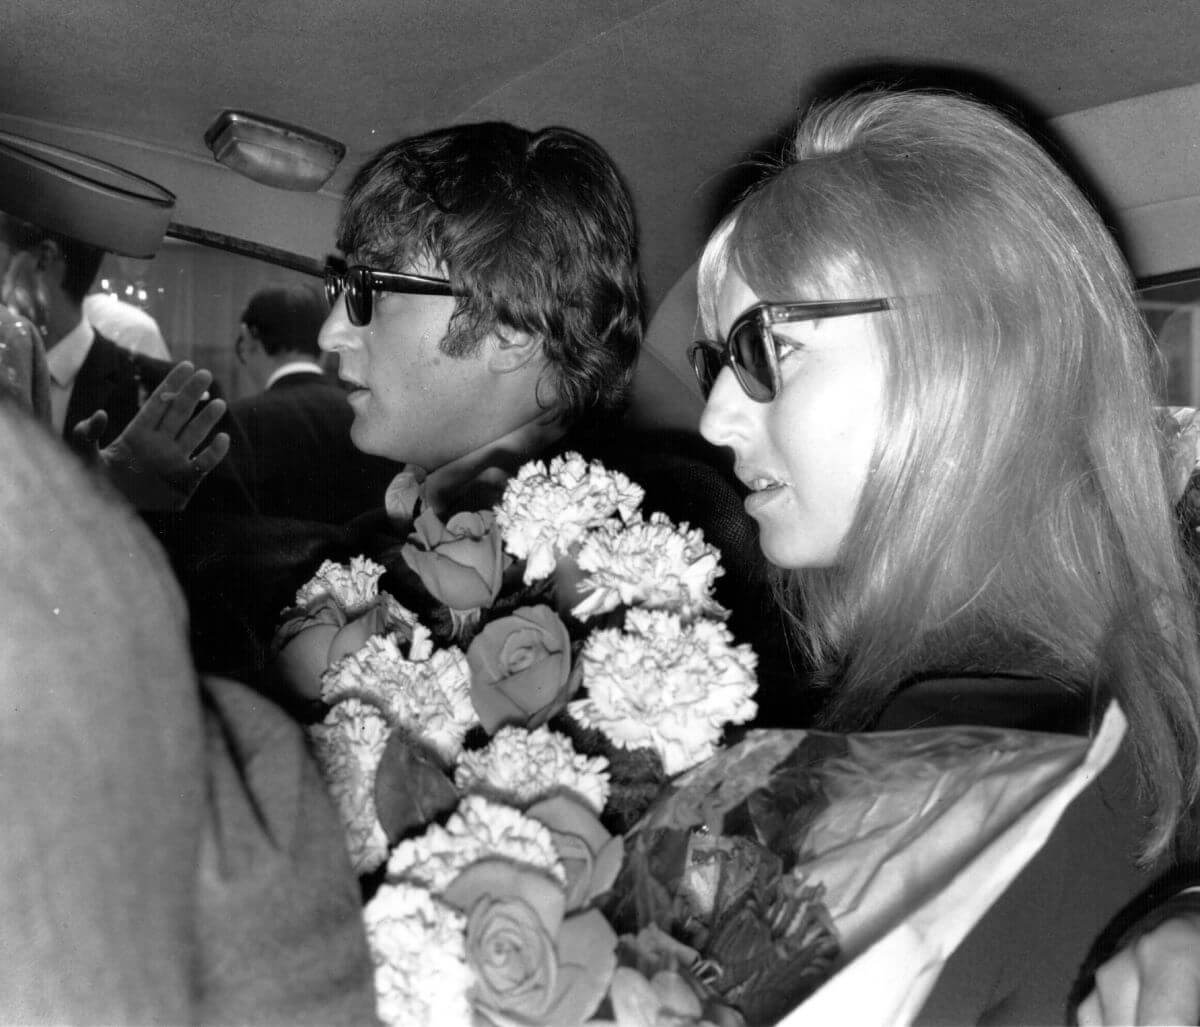 A black and white picture of John and Cynthia Lennon wearing sunglasses in the backseat of a car. Cynthia holds a bouquet of flowers.